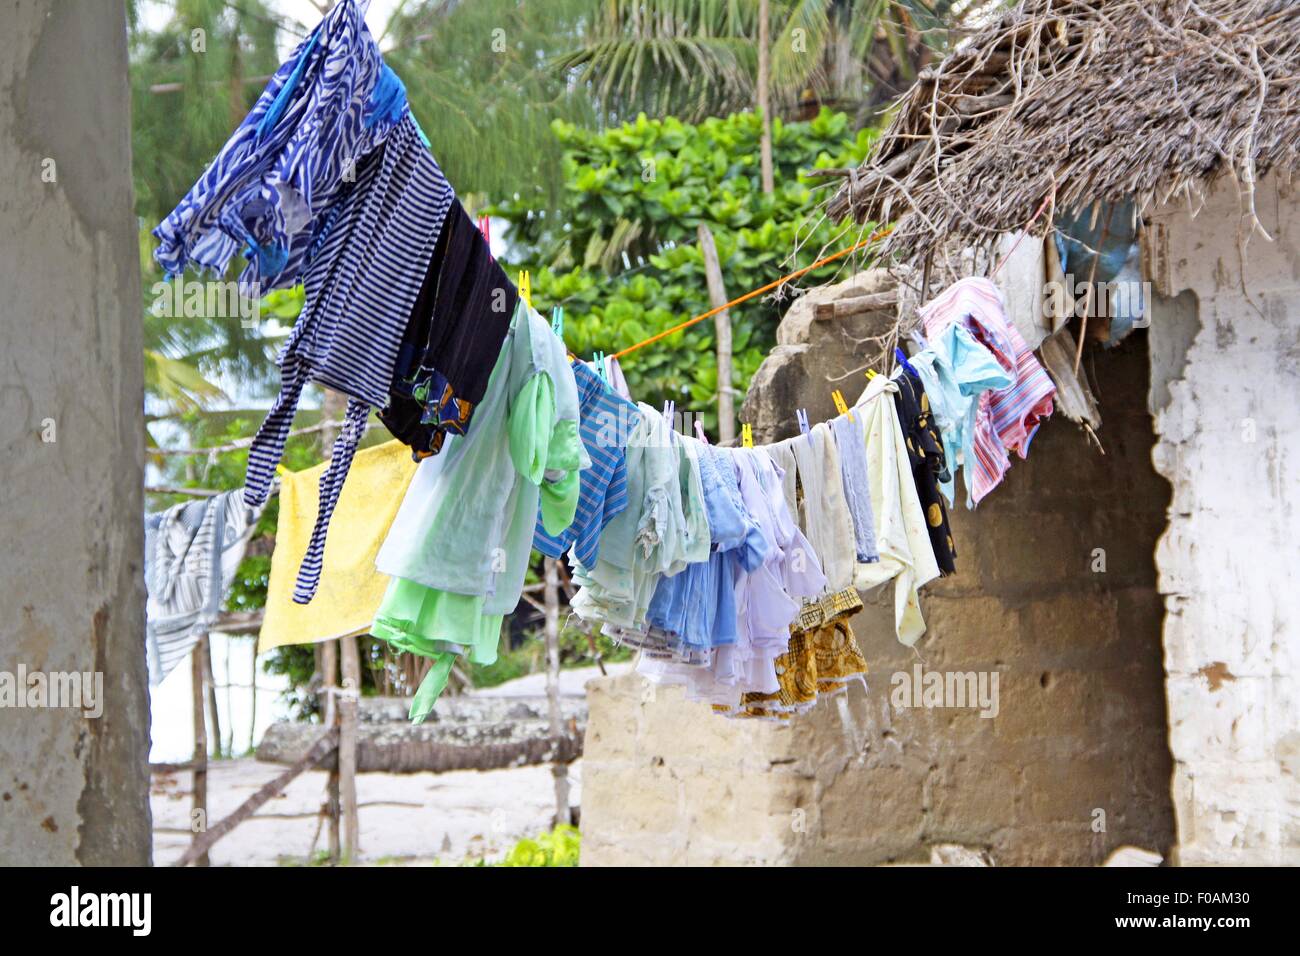 Clothes drying on rope in Zanzibar, Tanzania, East Africa Stock